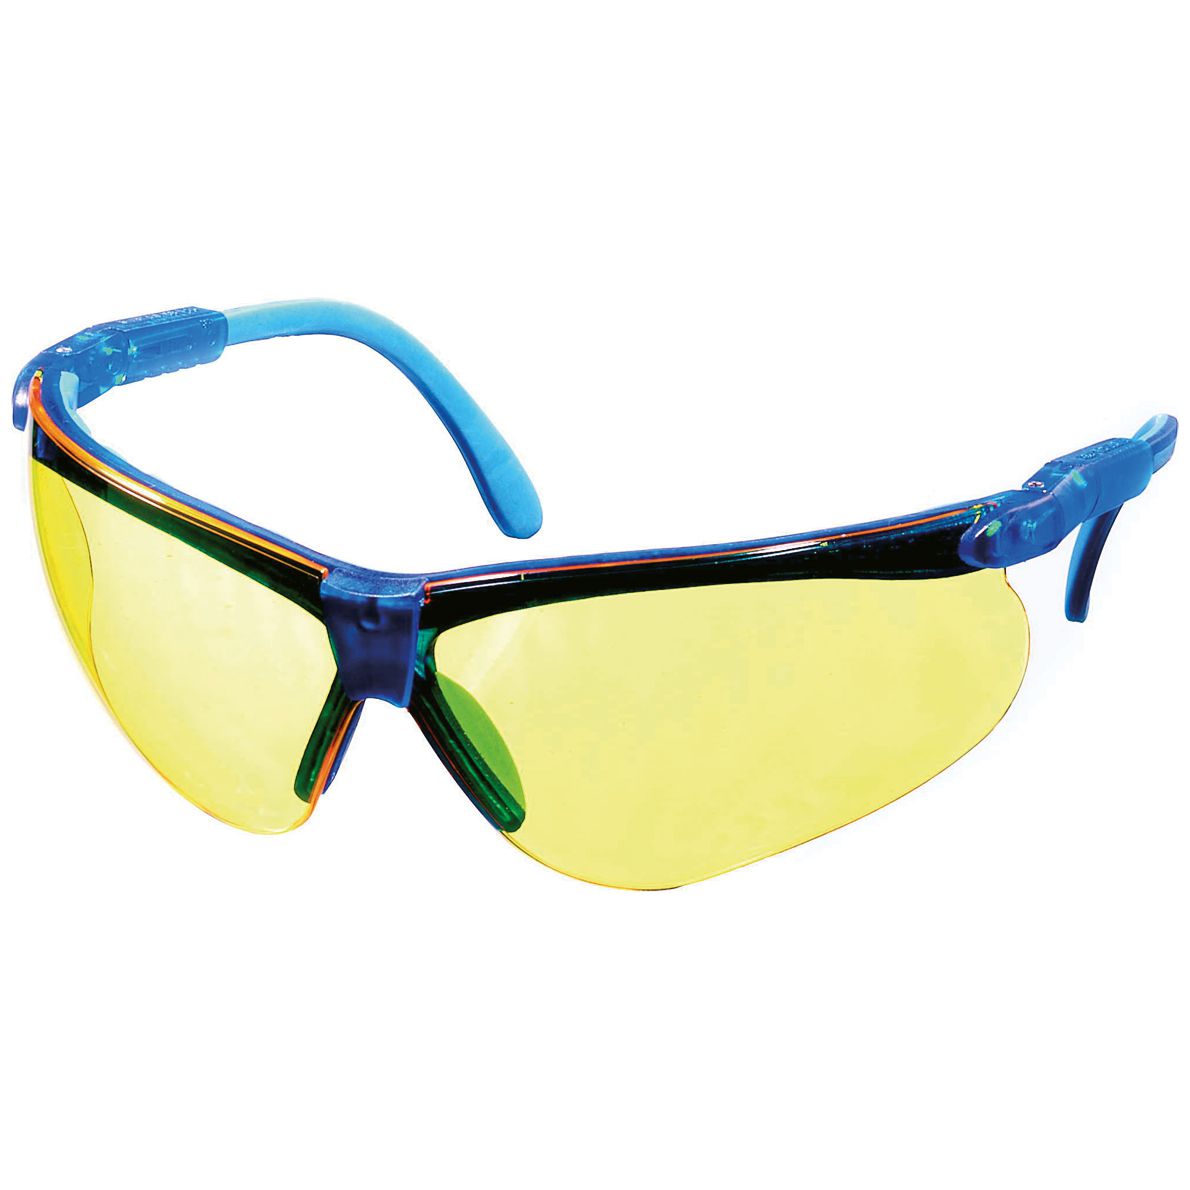 MSA Perspecta 010 safety glasses - scratch & fog resistant thanks to Sightgard coating - EN 166/170 - blue/yellow